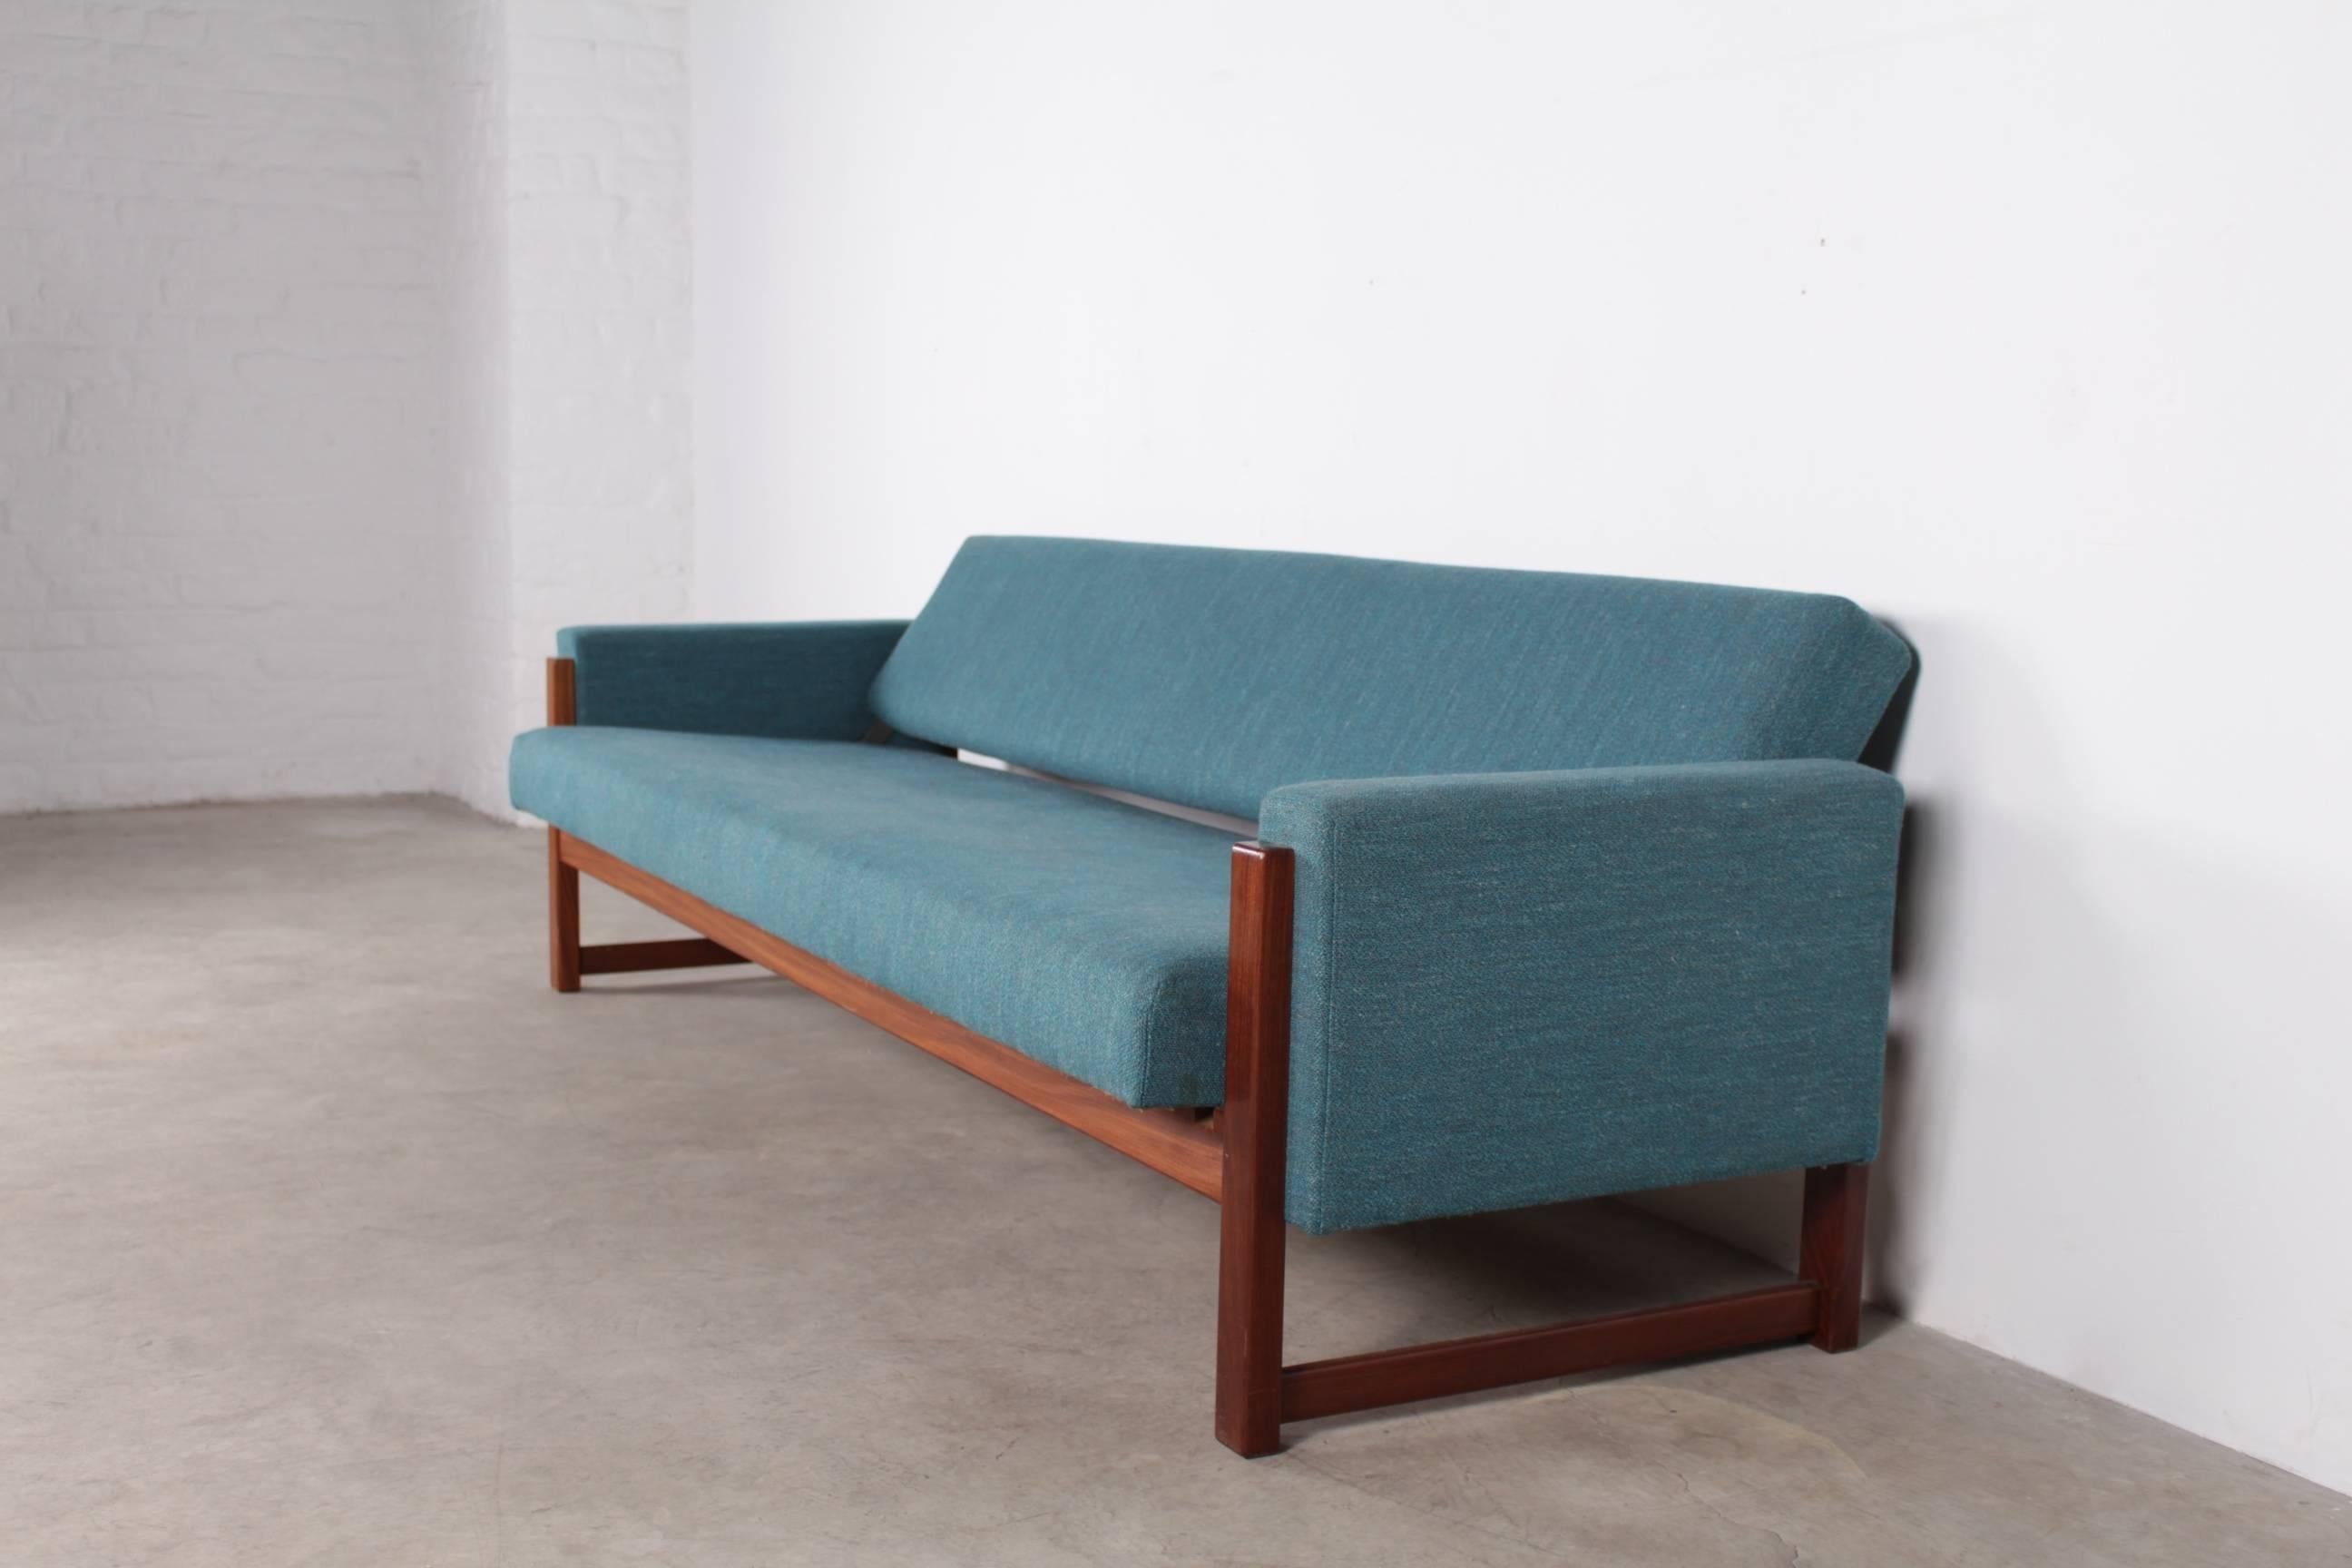 A quite rare sofa bed designed by Yngve Ekström in the 1960s, it is foldable by pulling on the seat and the back simultaneously and can be used as a daybed.
The frame is made of teak, with new upholstery.
Excellent condition.
As daybed, depth is